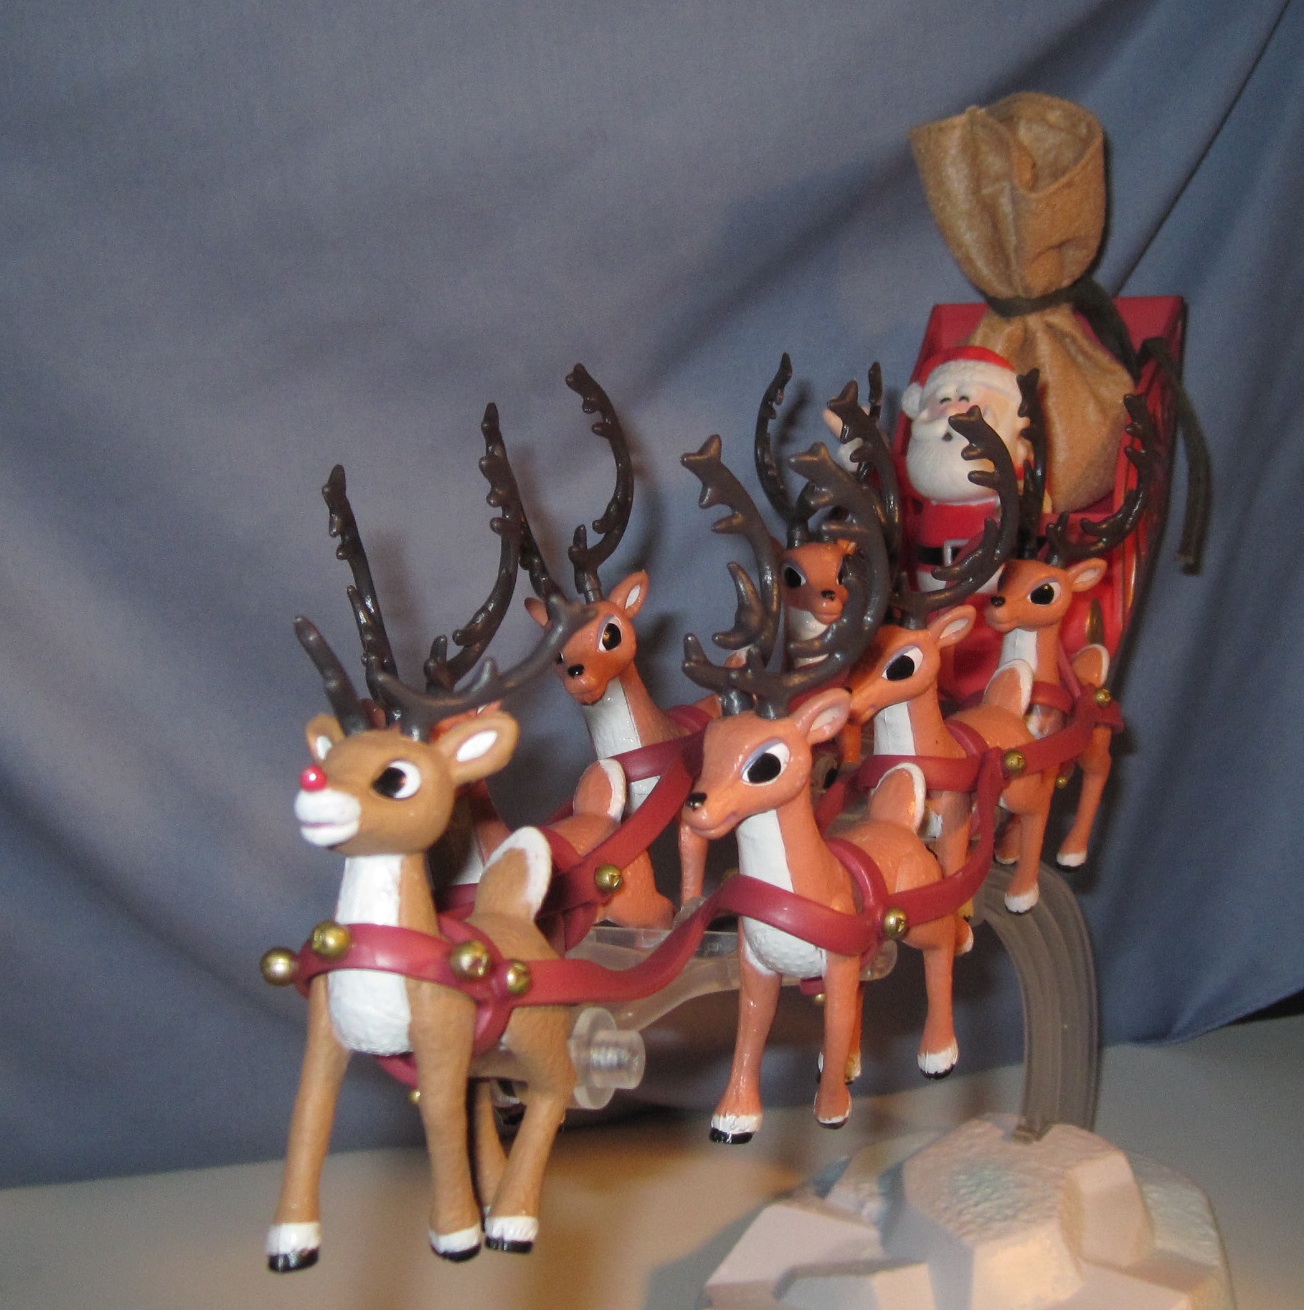 Toy Review: Rudolph the Red-Nose Reindeer: Santa's Musical Sleigh.